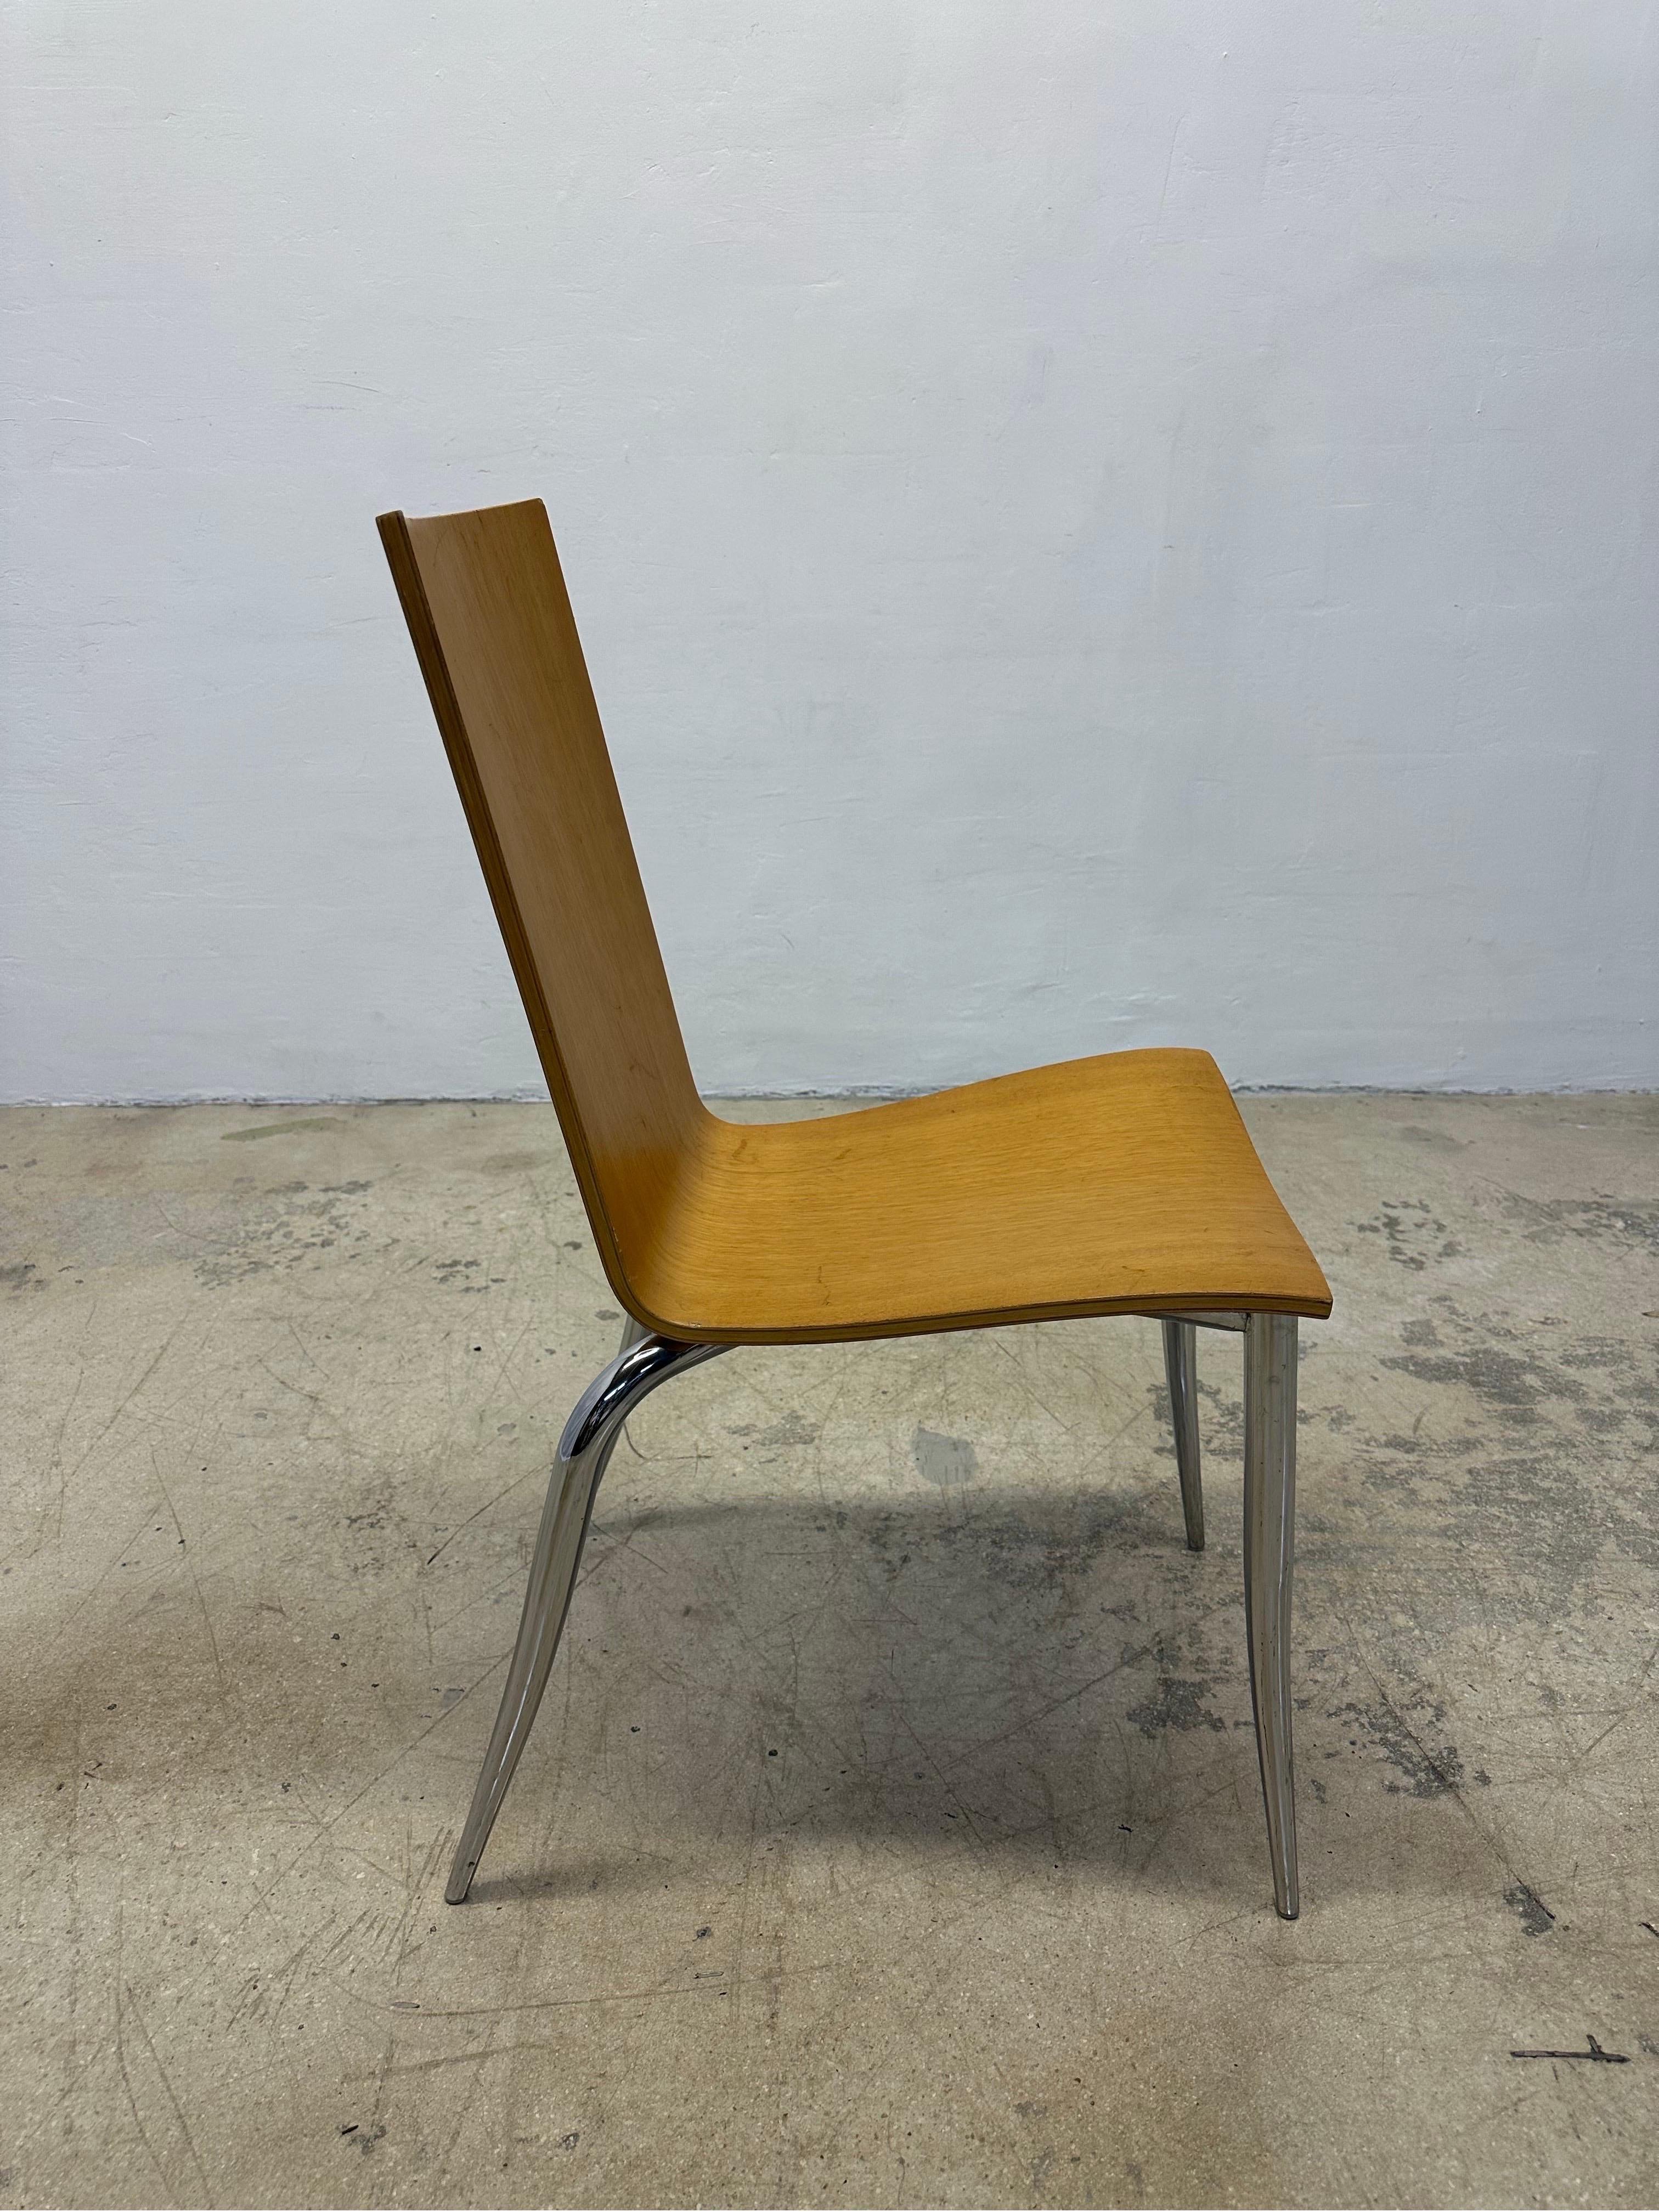 Bent bentwood Olly Tango chair on chrome legs by Philippe Starck for Aleph Ubik.